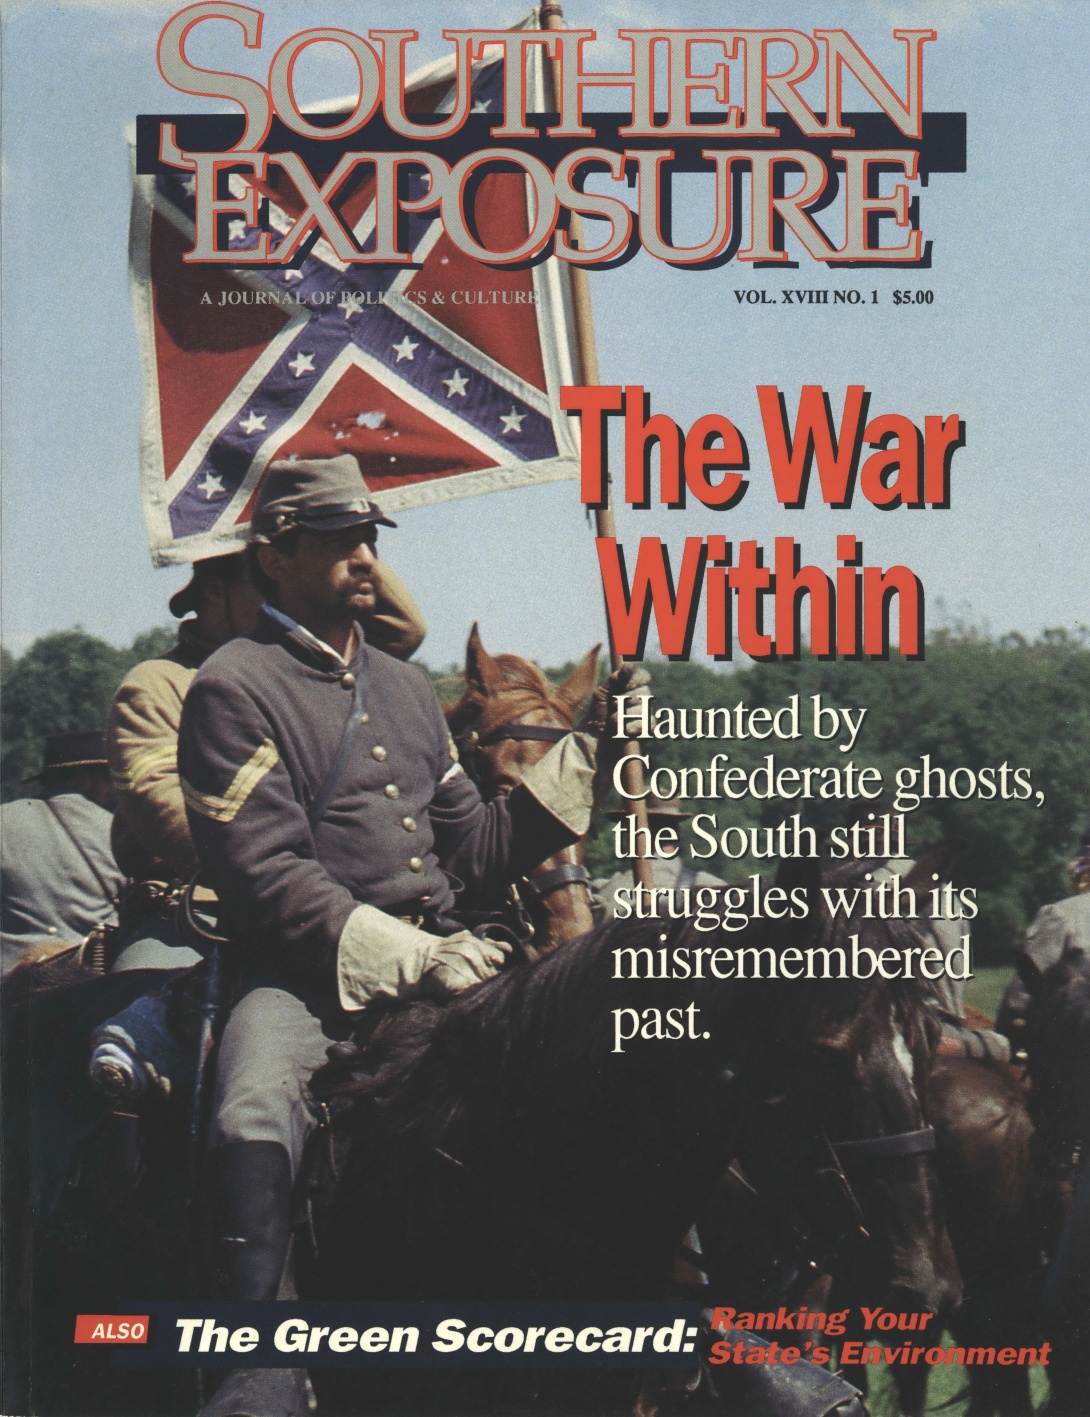 Magazine cover with reenactor holding Confederate battle flag, reading "The War Within"